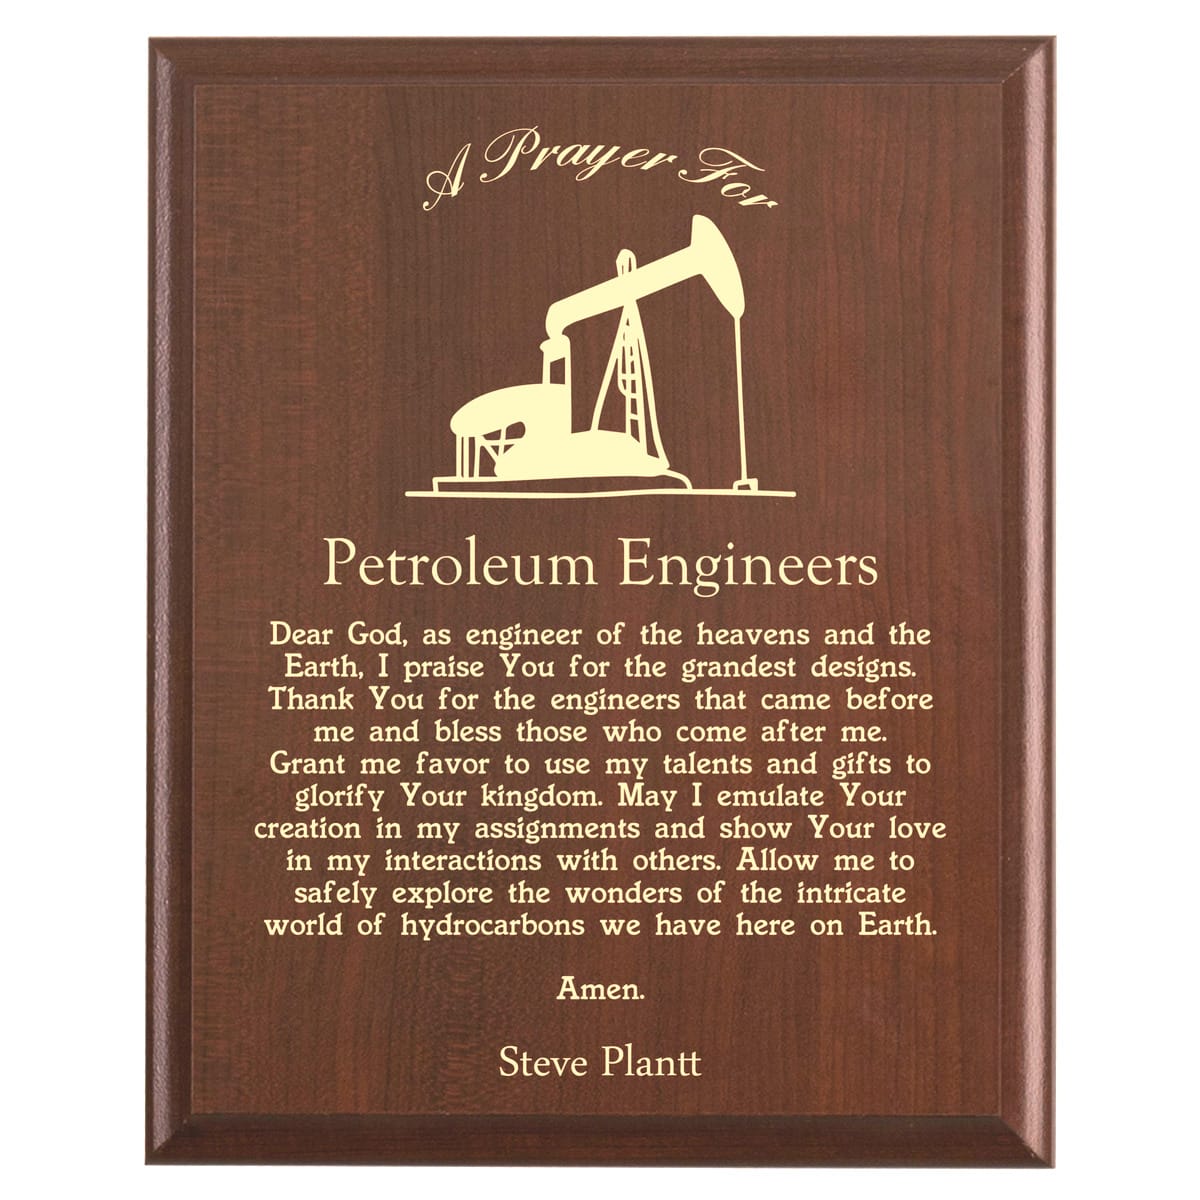 Plaque photo: Petroleum Engineer Prayer Plaque design with free personalization. Wood style finish with customized text.